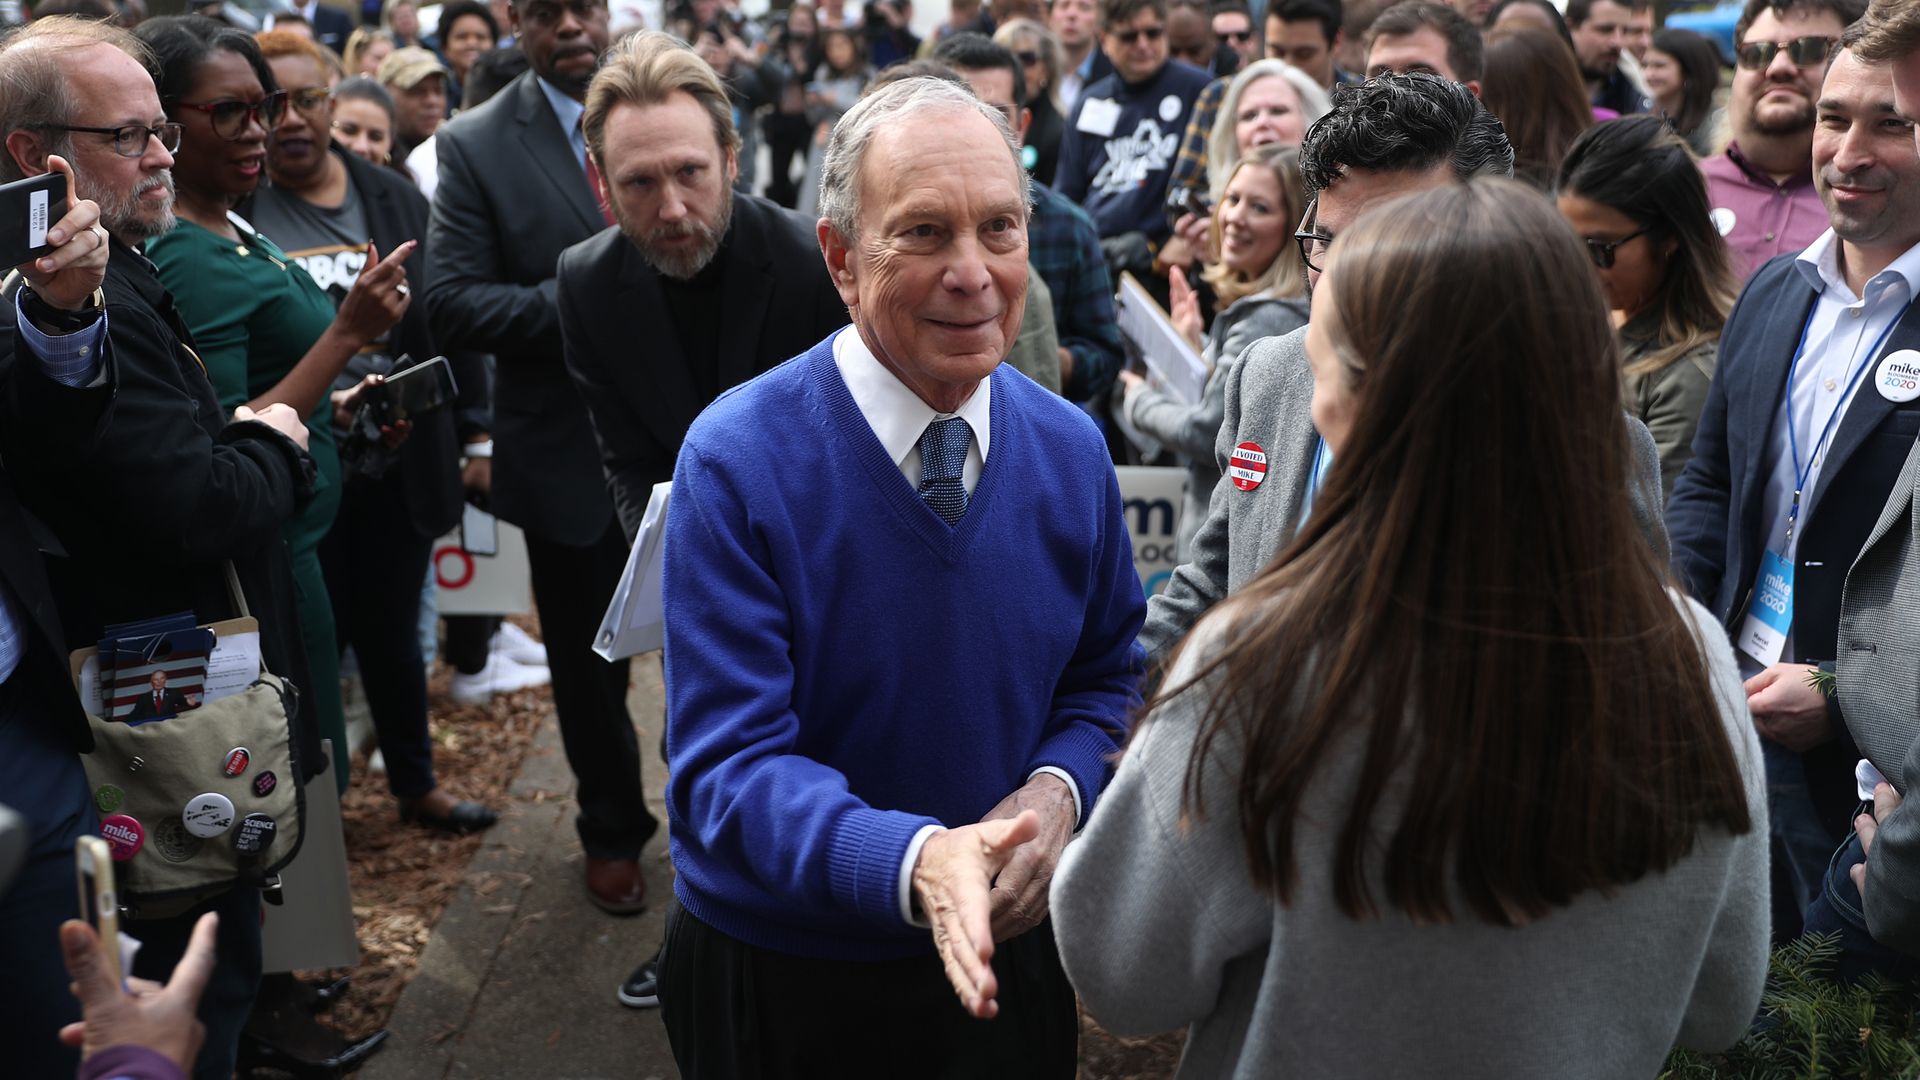 Mike Bloomberg greets supporters during a stop at one of his campaign offices in Manassas, VA